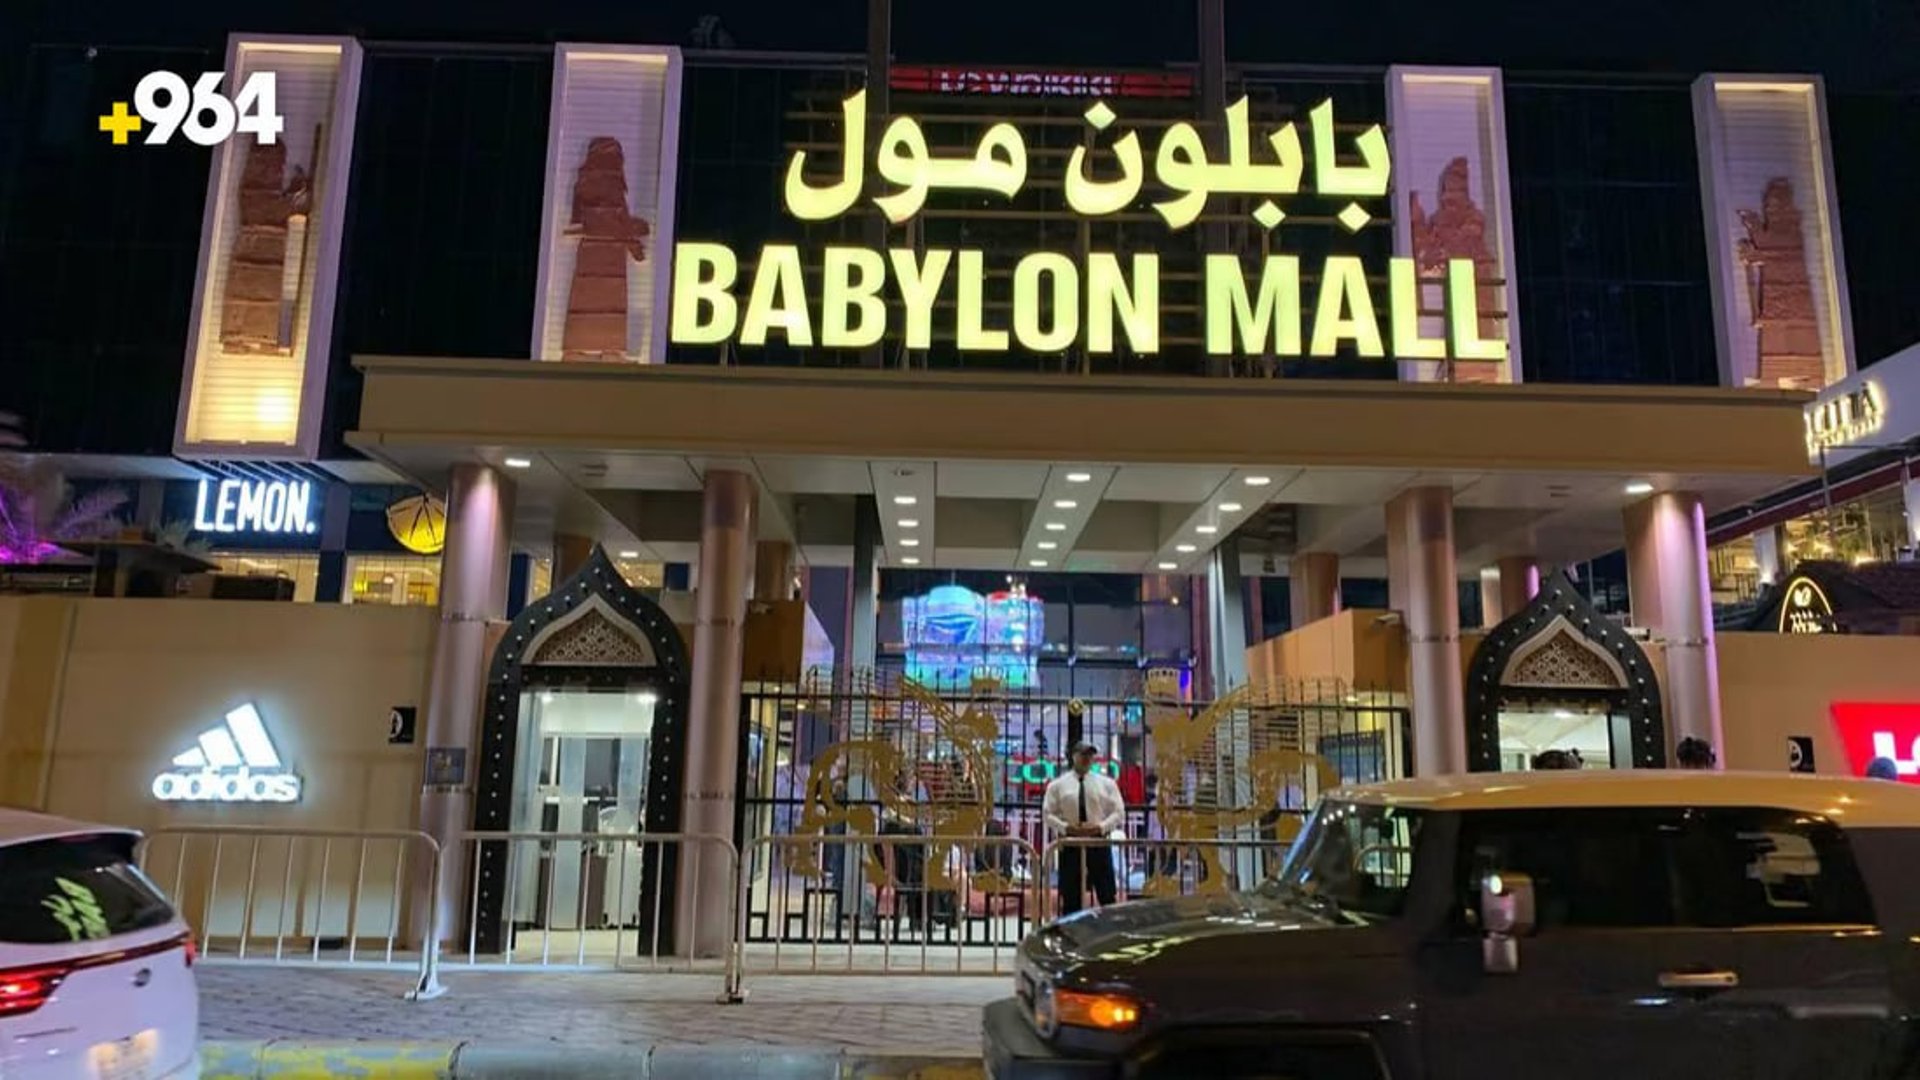 Collects donations to support needy families for the new school year at Babylon mall